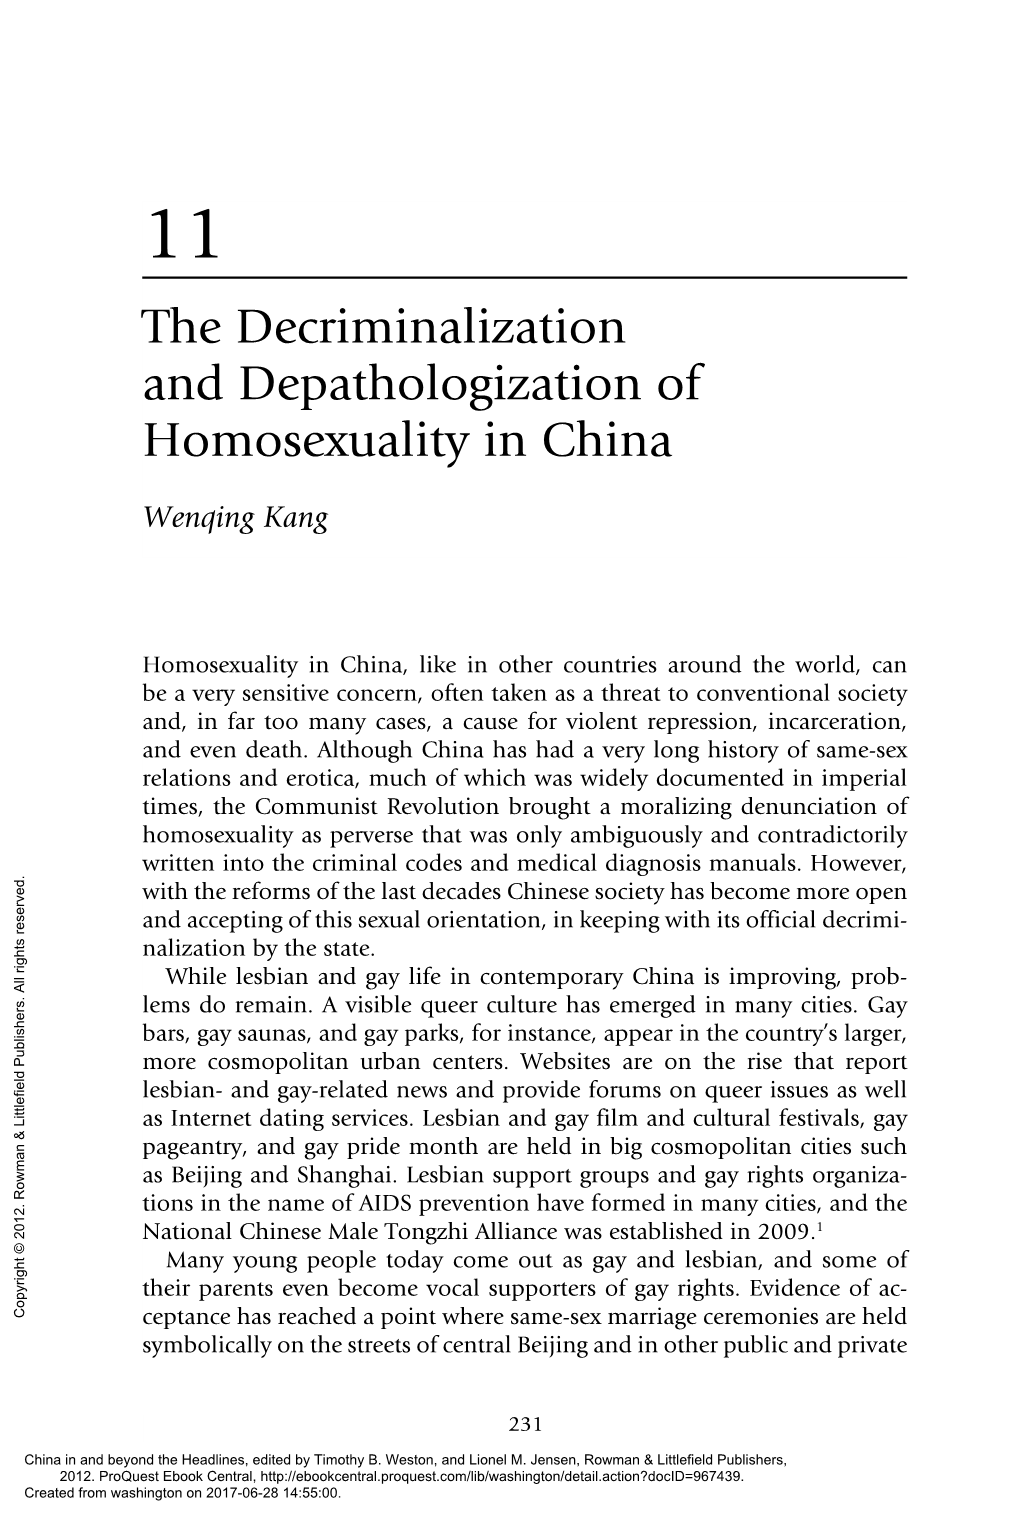 Homosexuality in China